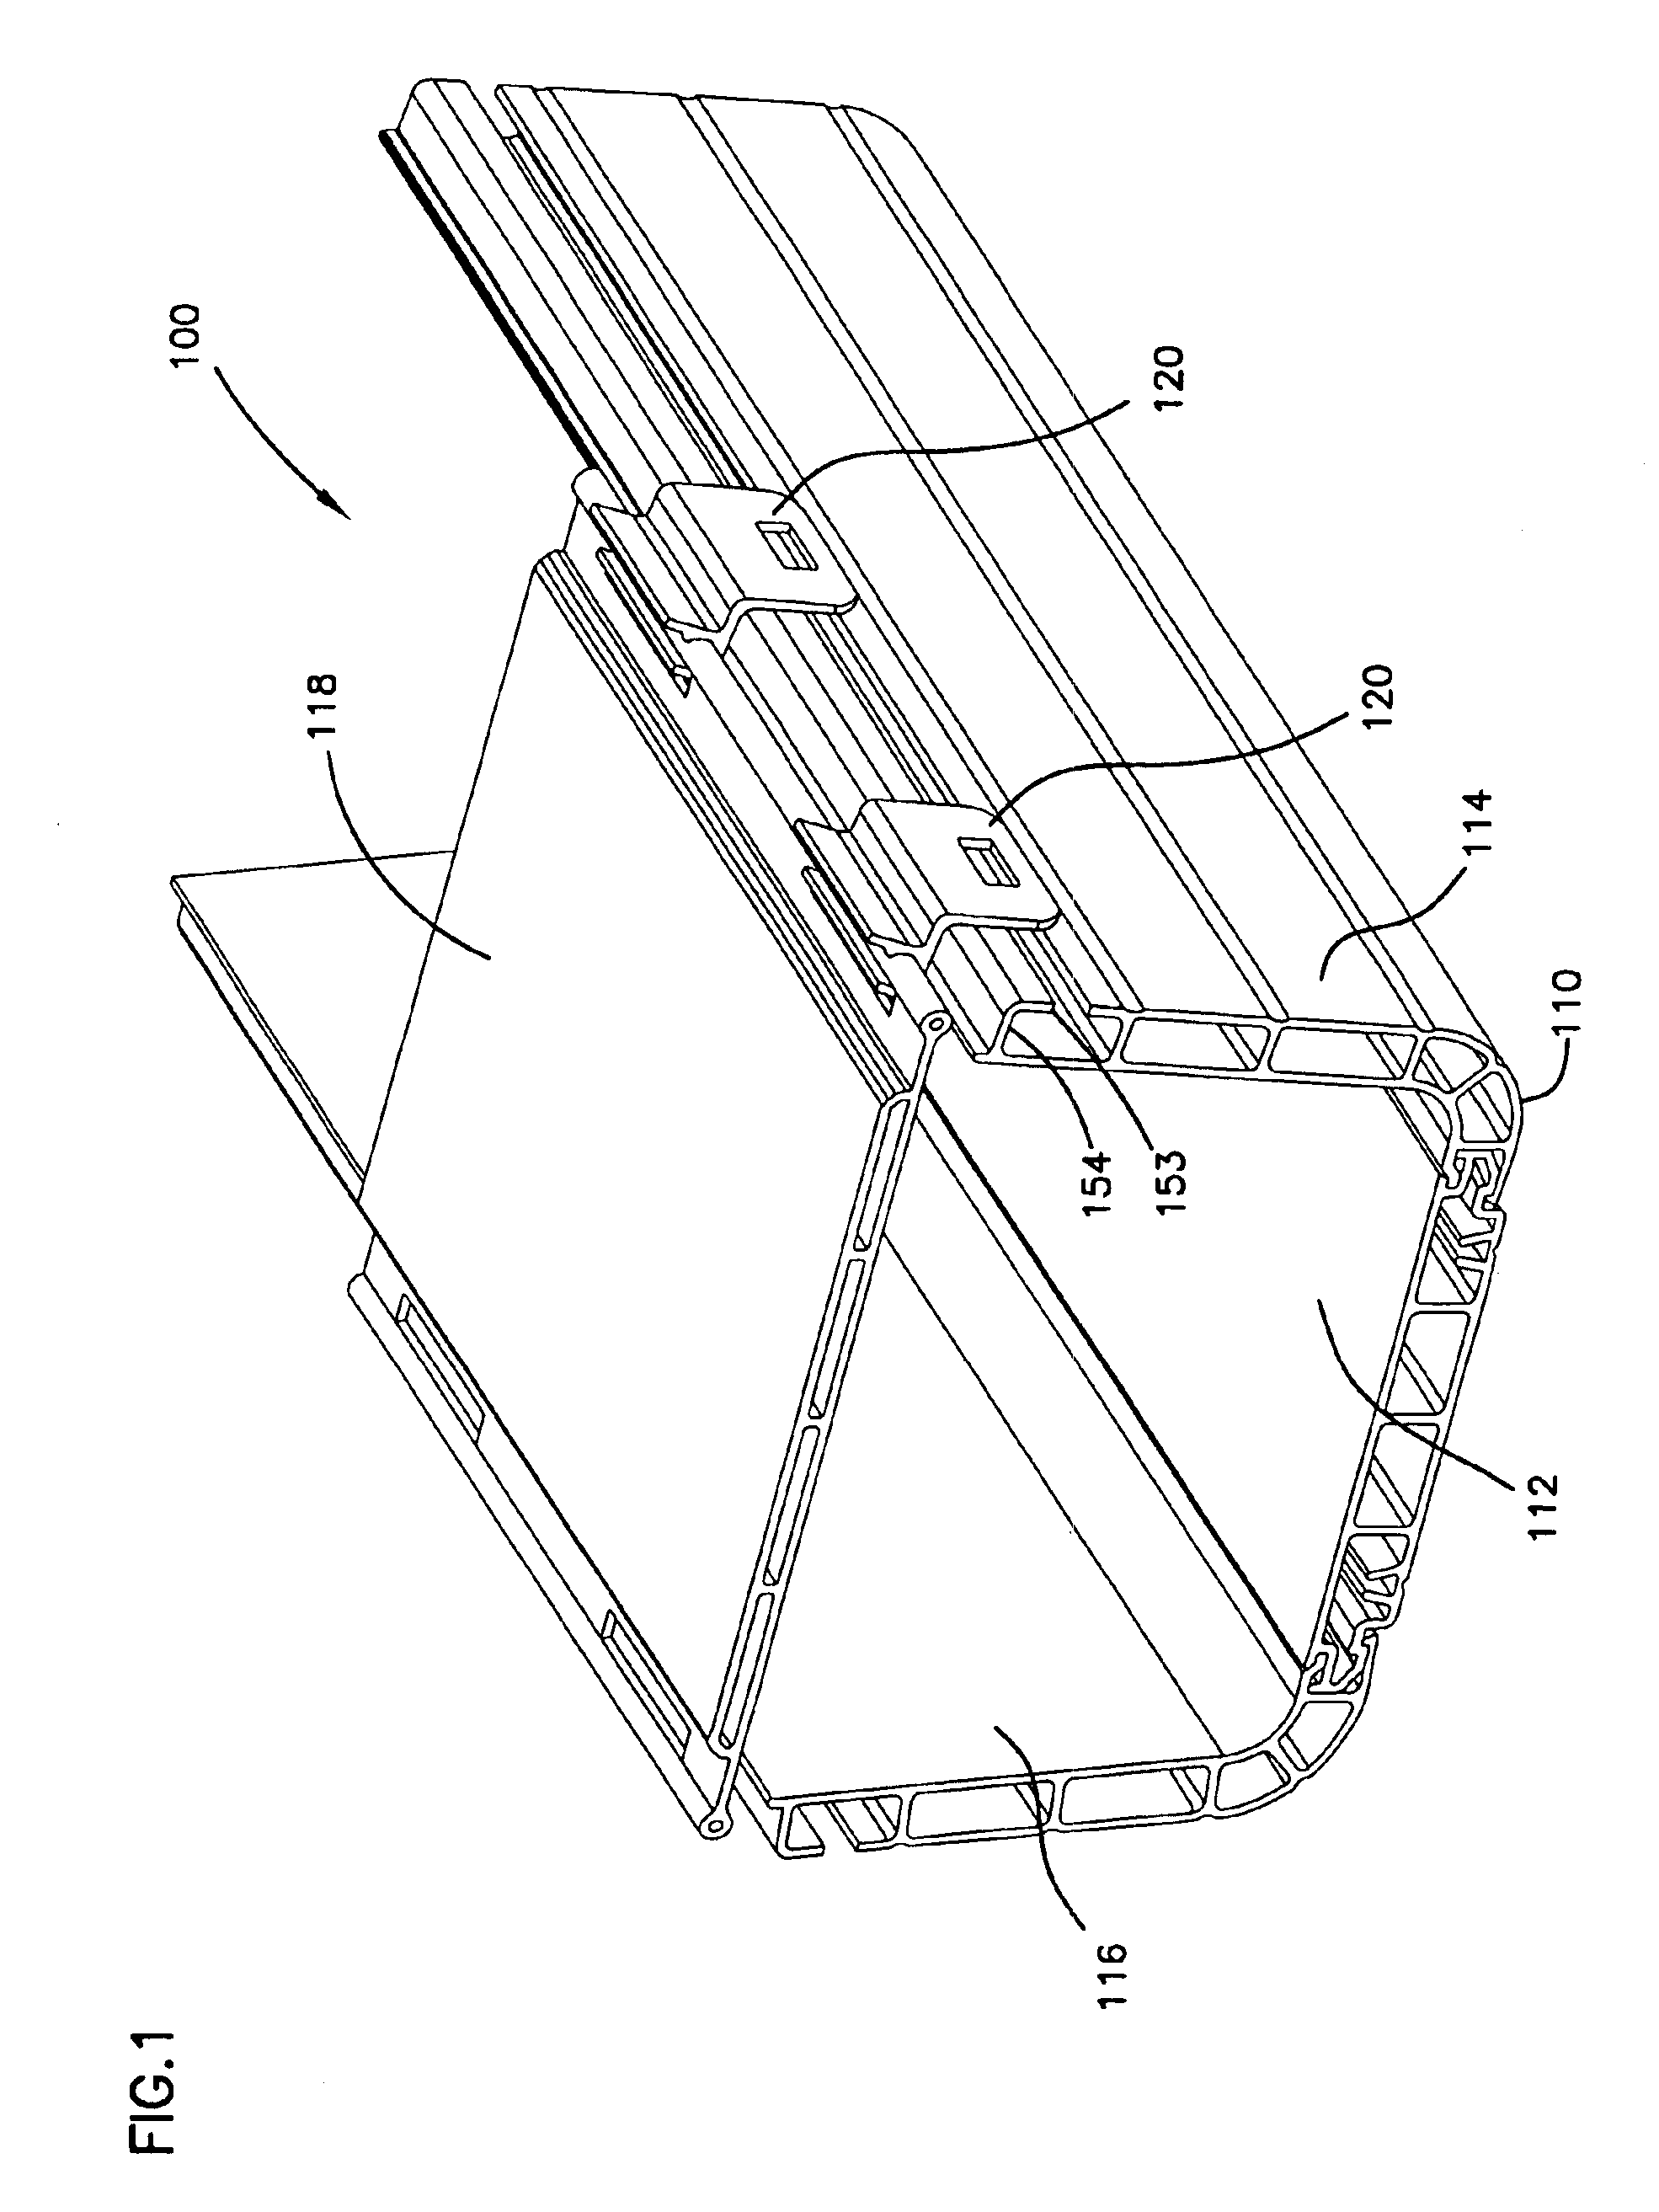 Cable trough cover